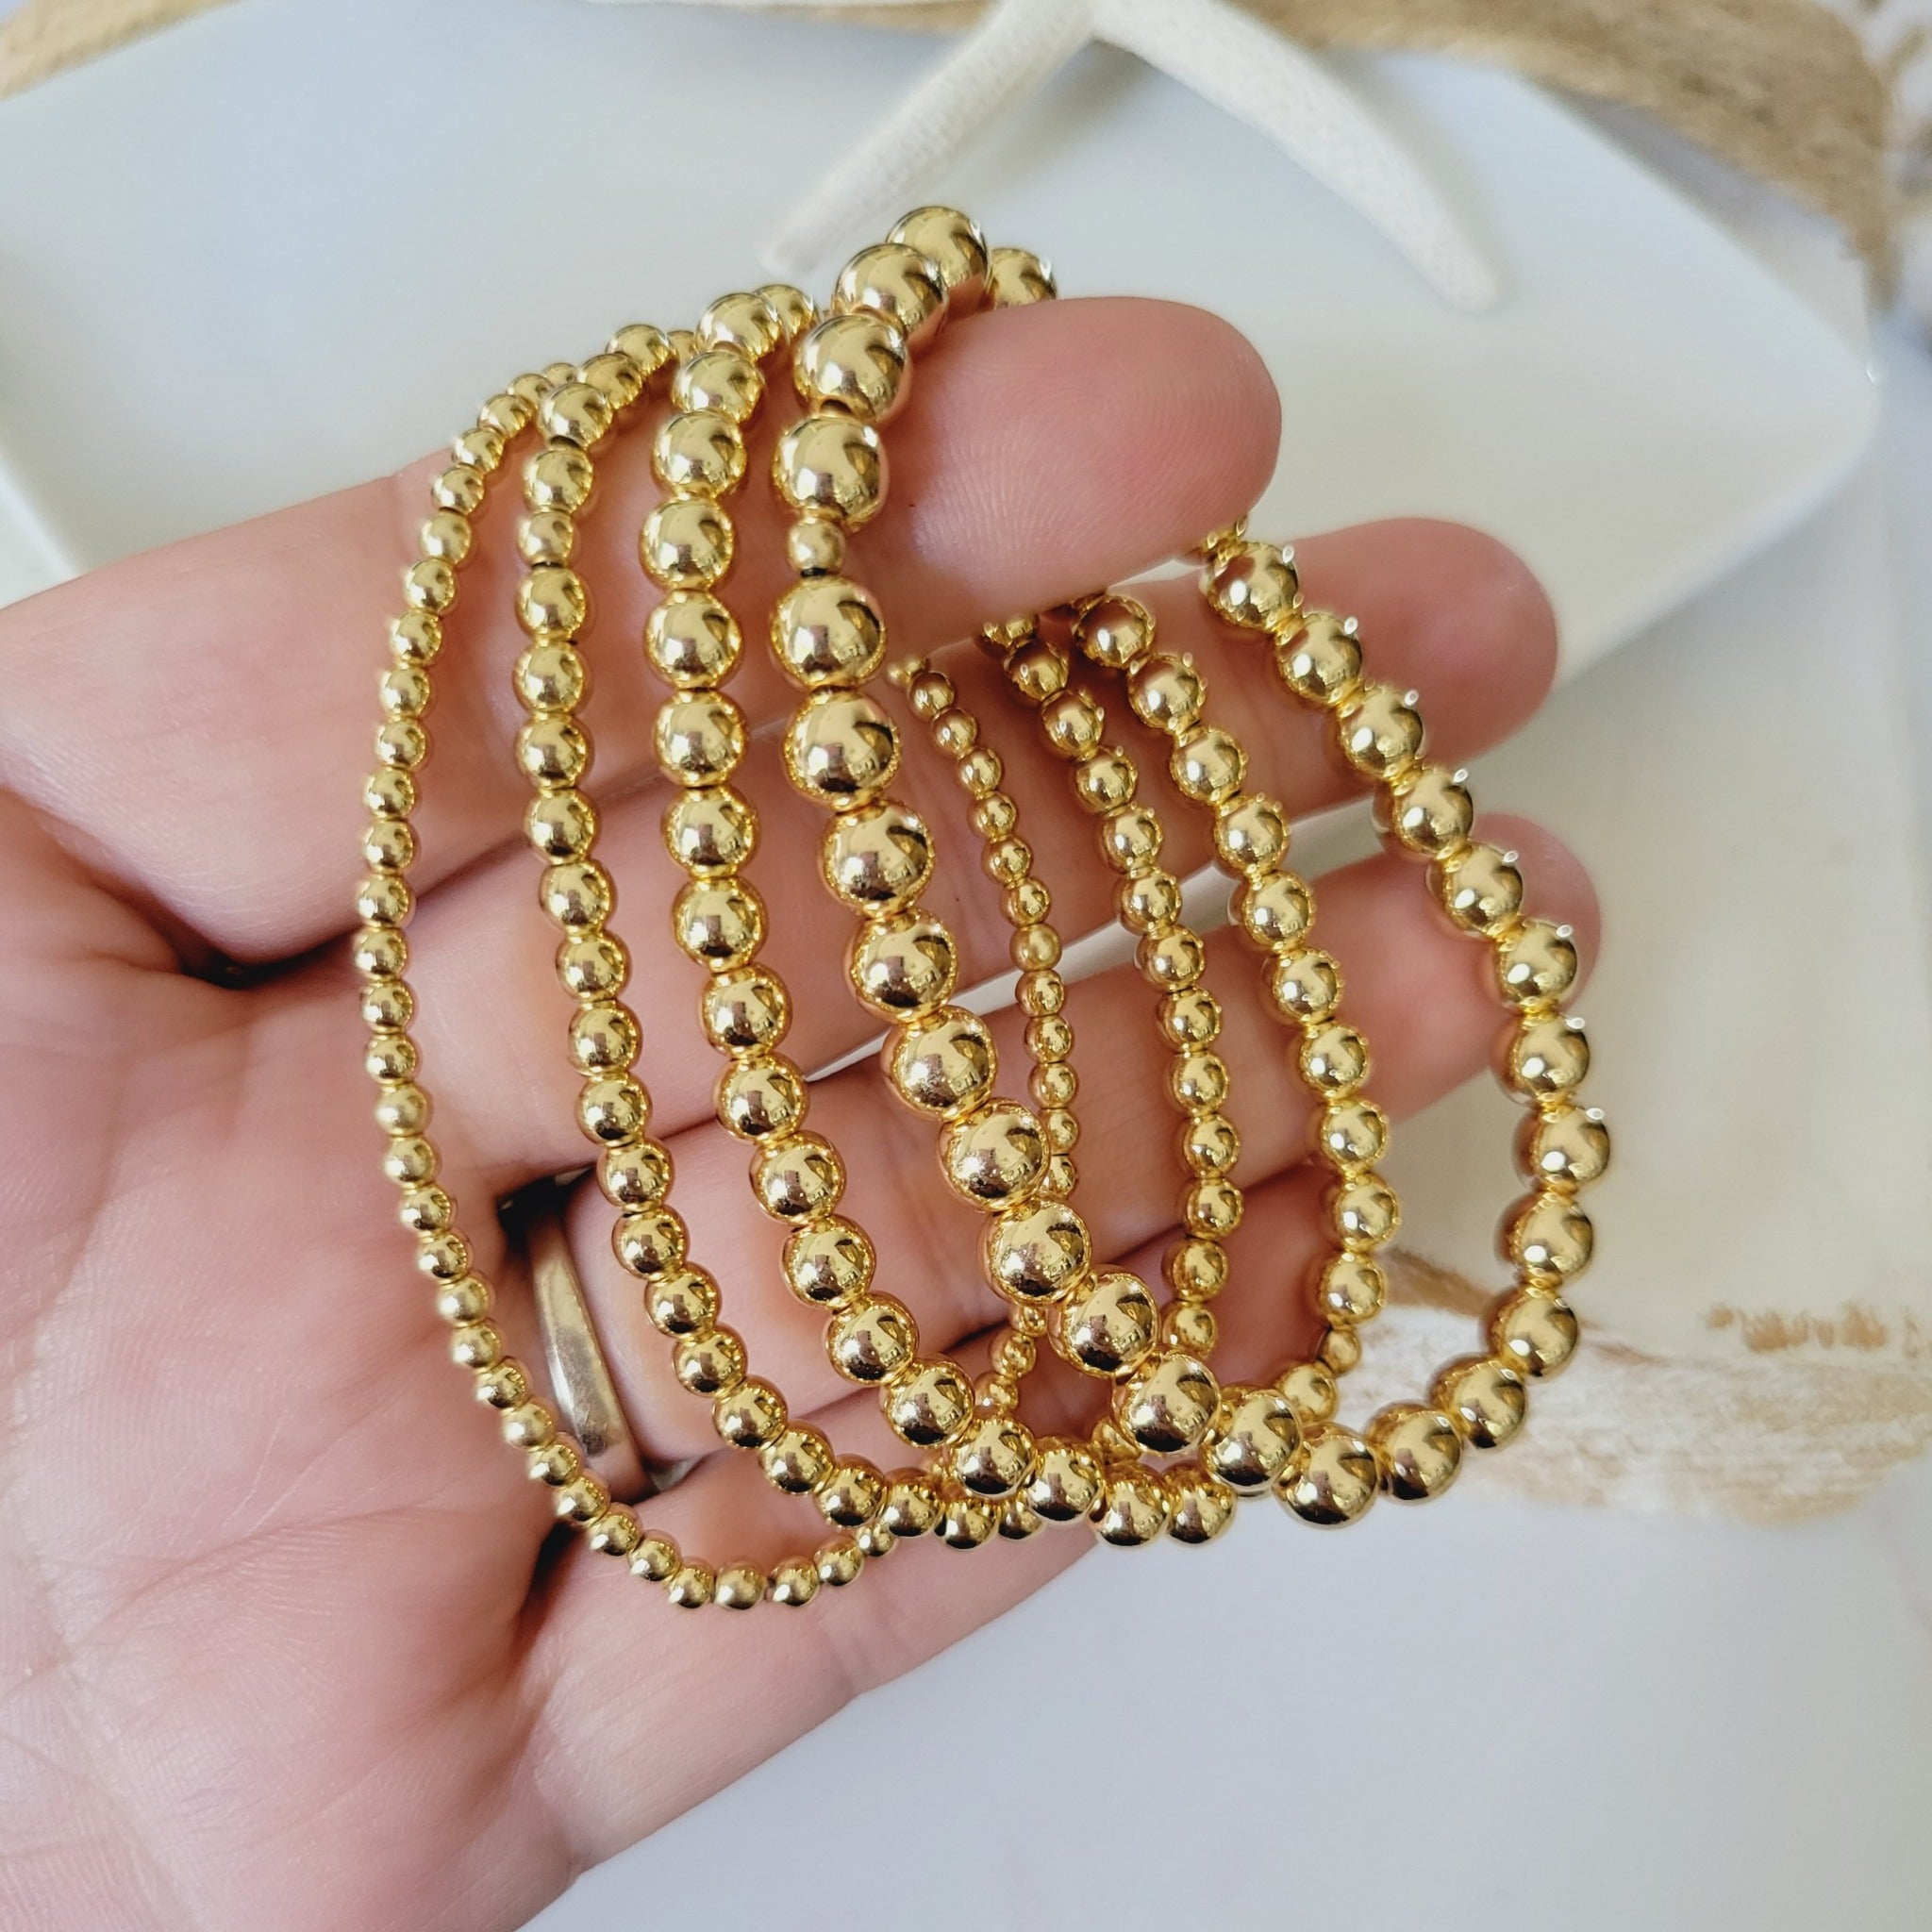 Babies/Toddlers Gold Beaded Stretch or Clasp Keepsake Bracelet - 3mm, 4mm, 5mm